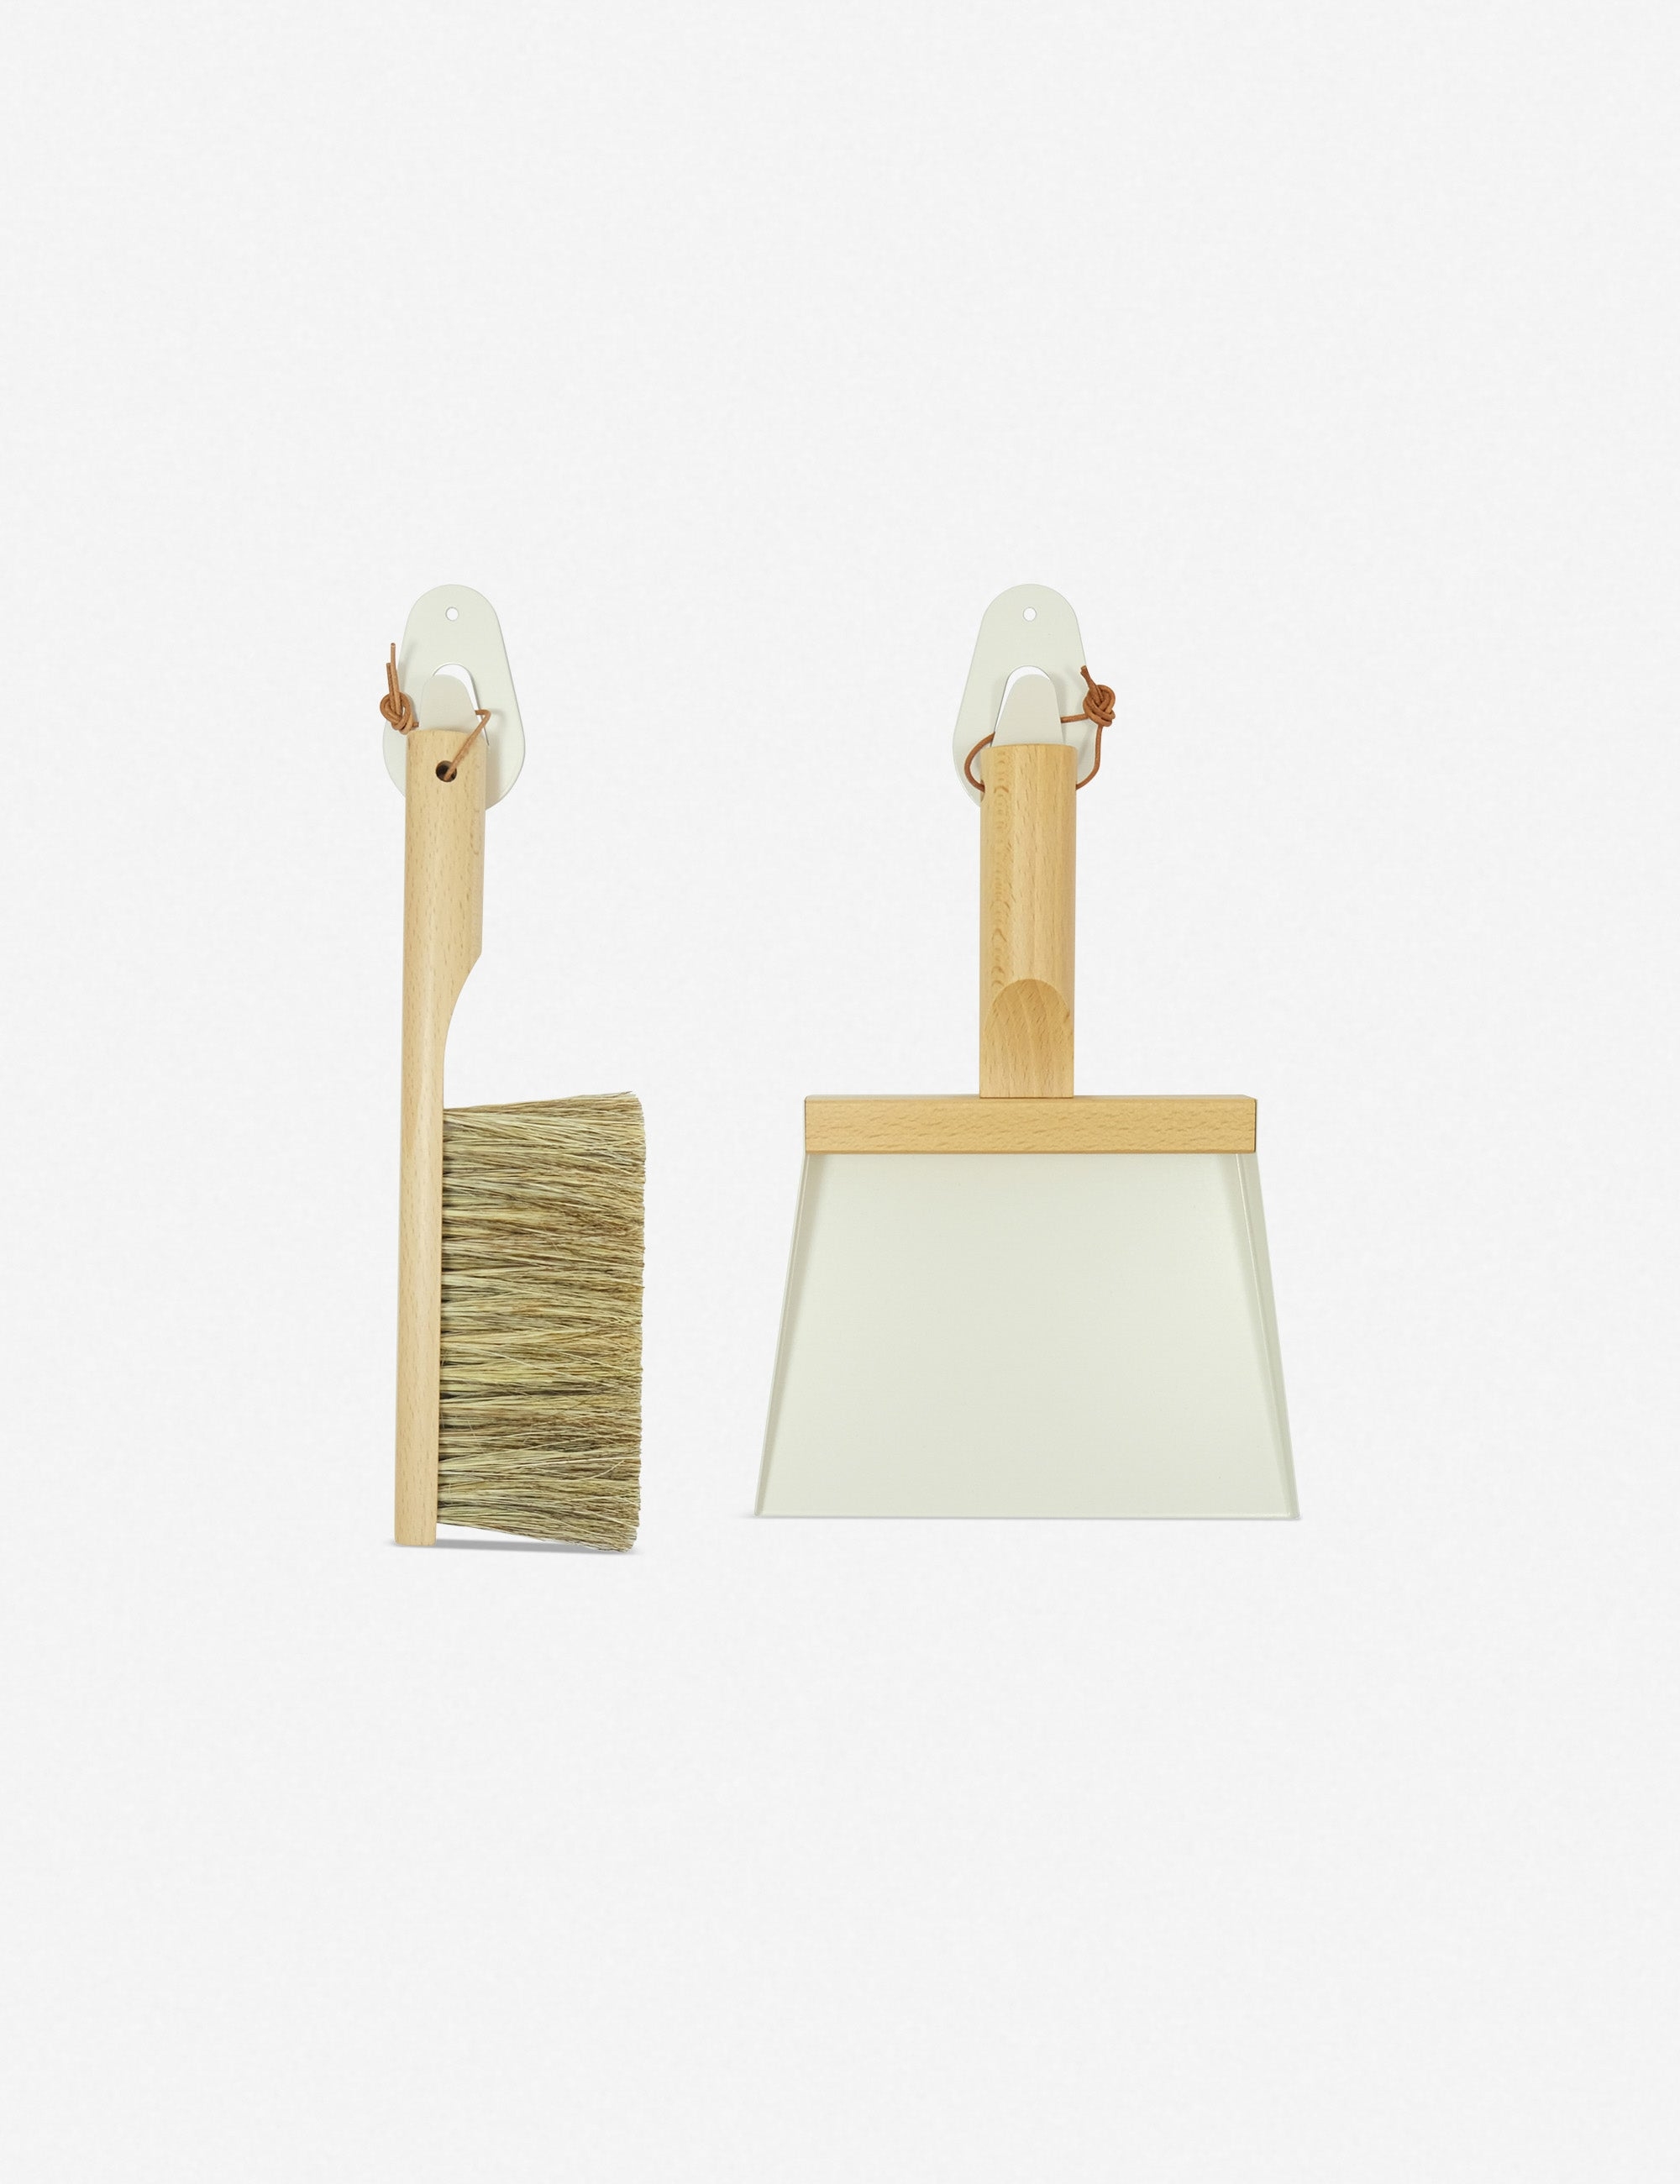 Mr. and Mrs. Clynk Dustpan + Natural Brush with Wall Hooks Set by AndrÃ©e Jardin - Image 0